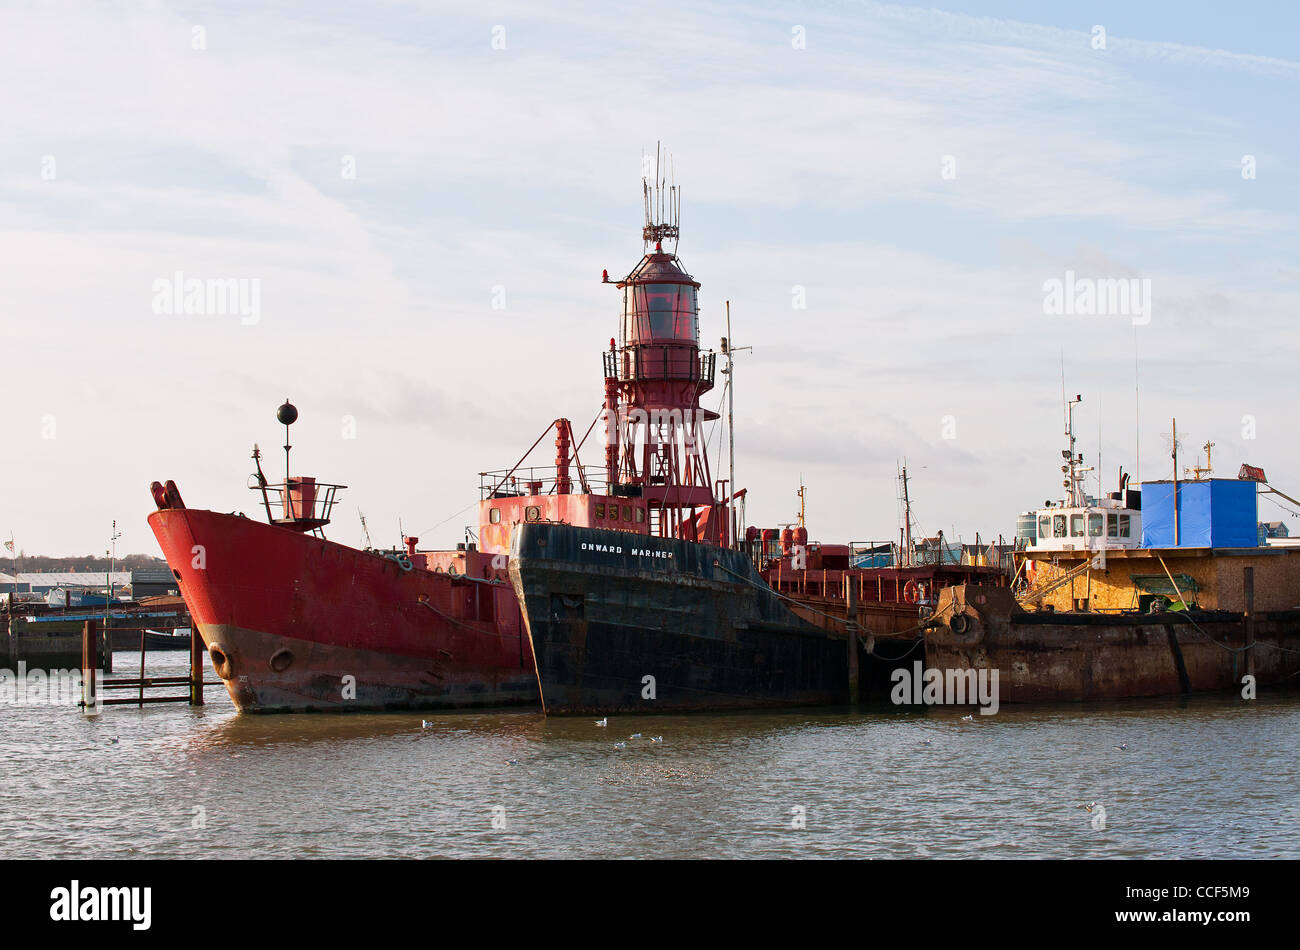 A disused lightship and other craft moored on the River Medway Stock Photo